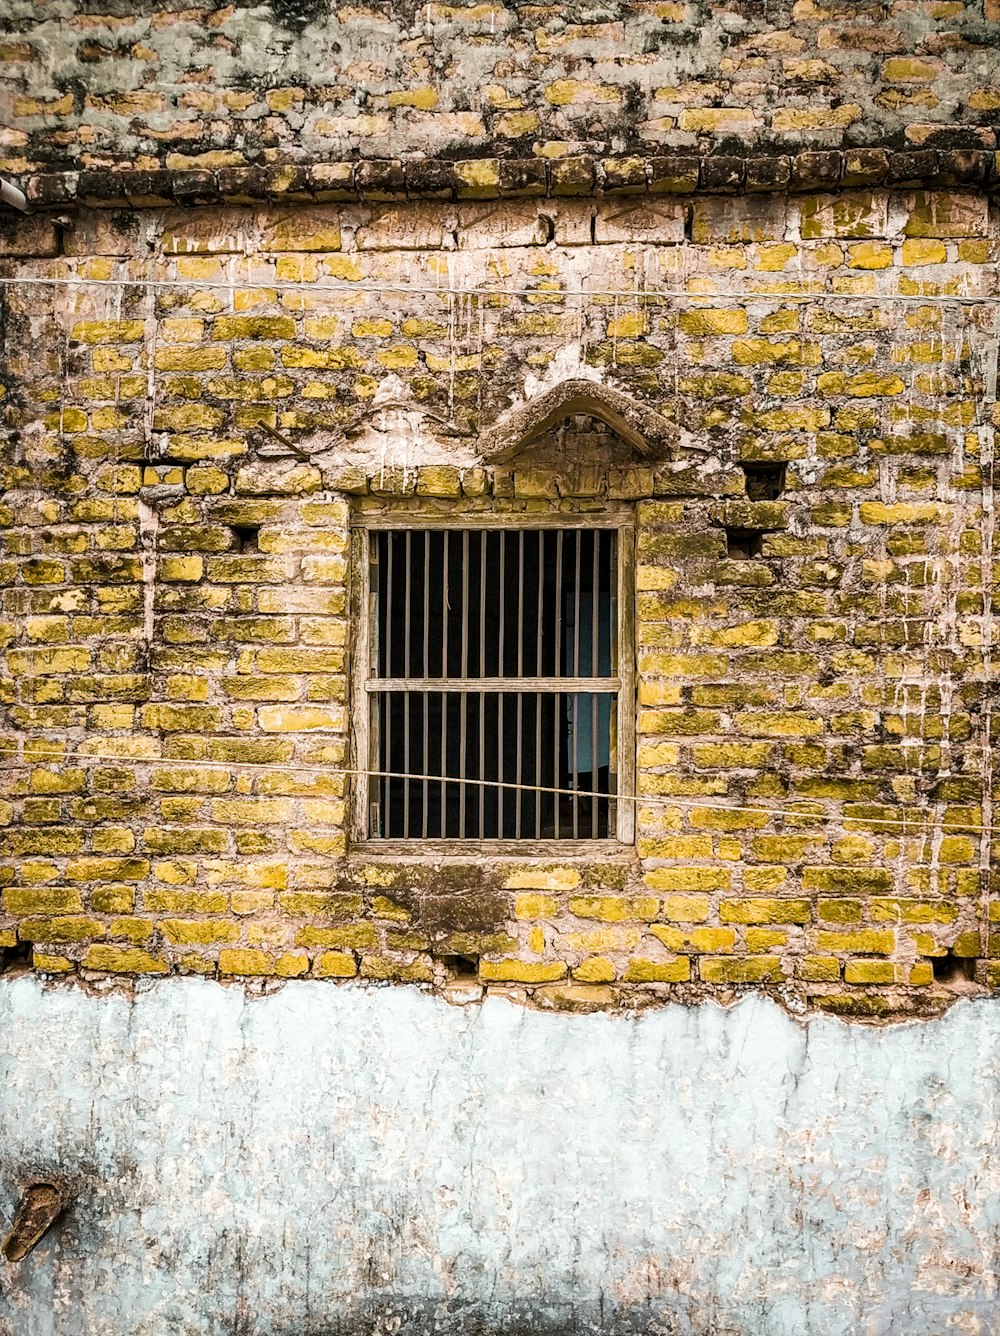 a window in a brick building with Kaaba in the background